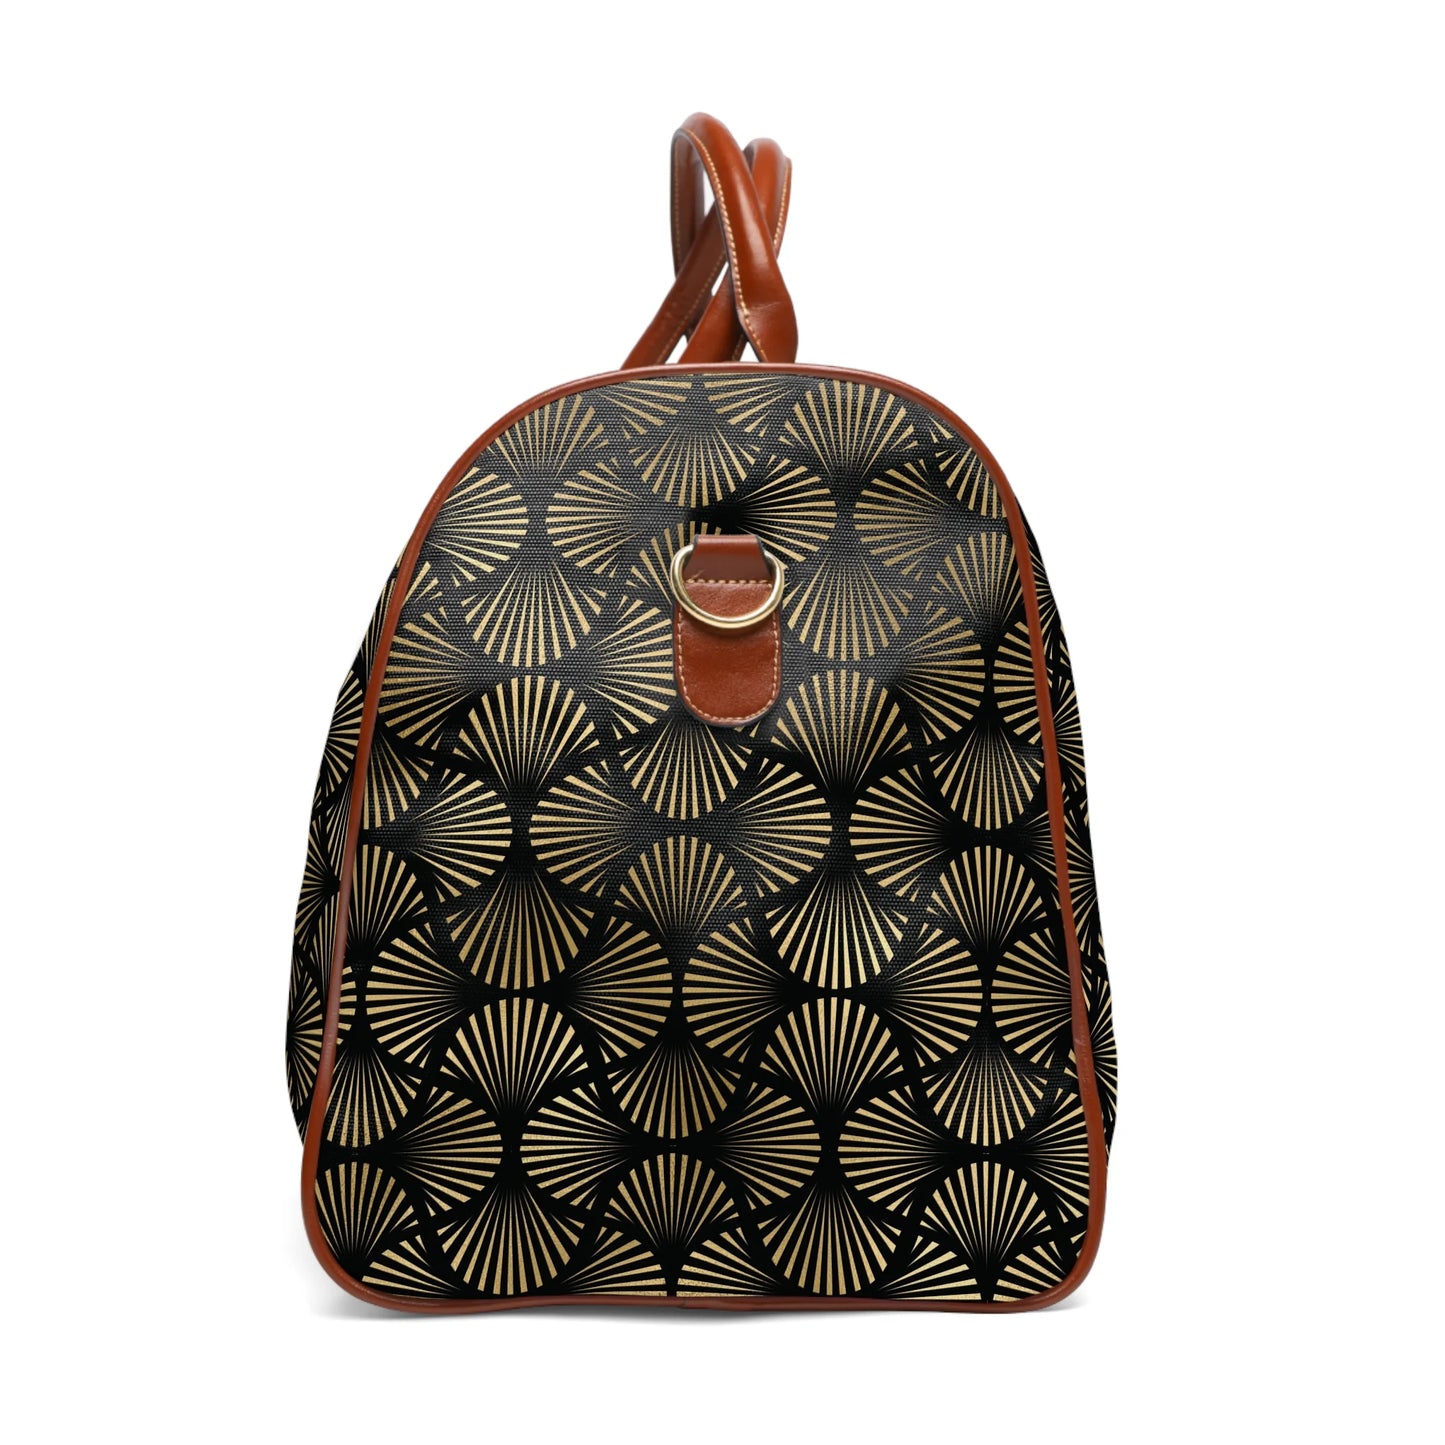 Black And Gold Art Deco Flower Reflections Travel Bag